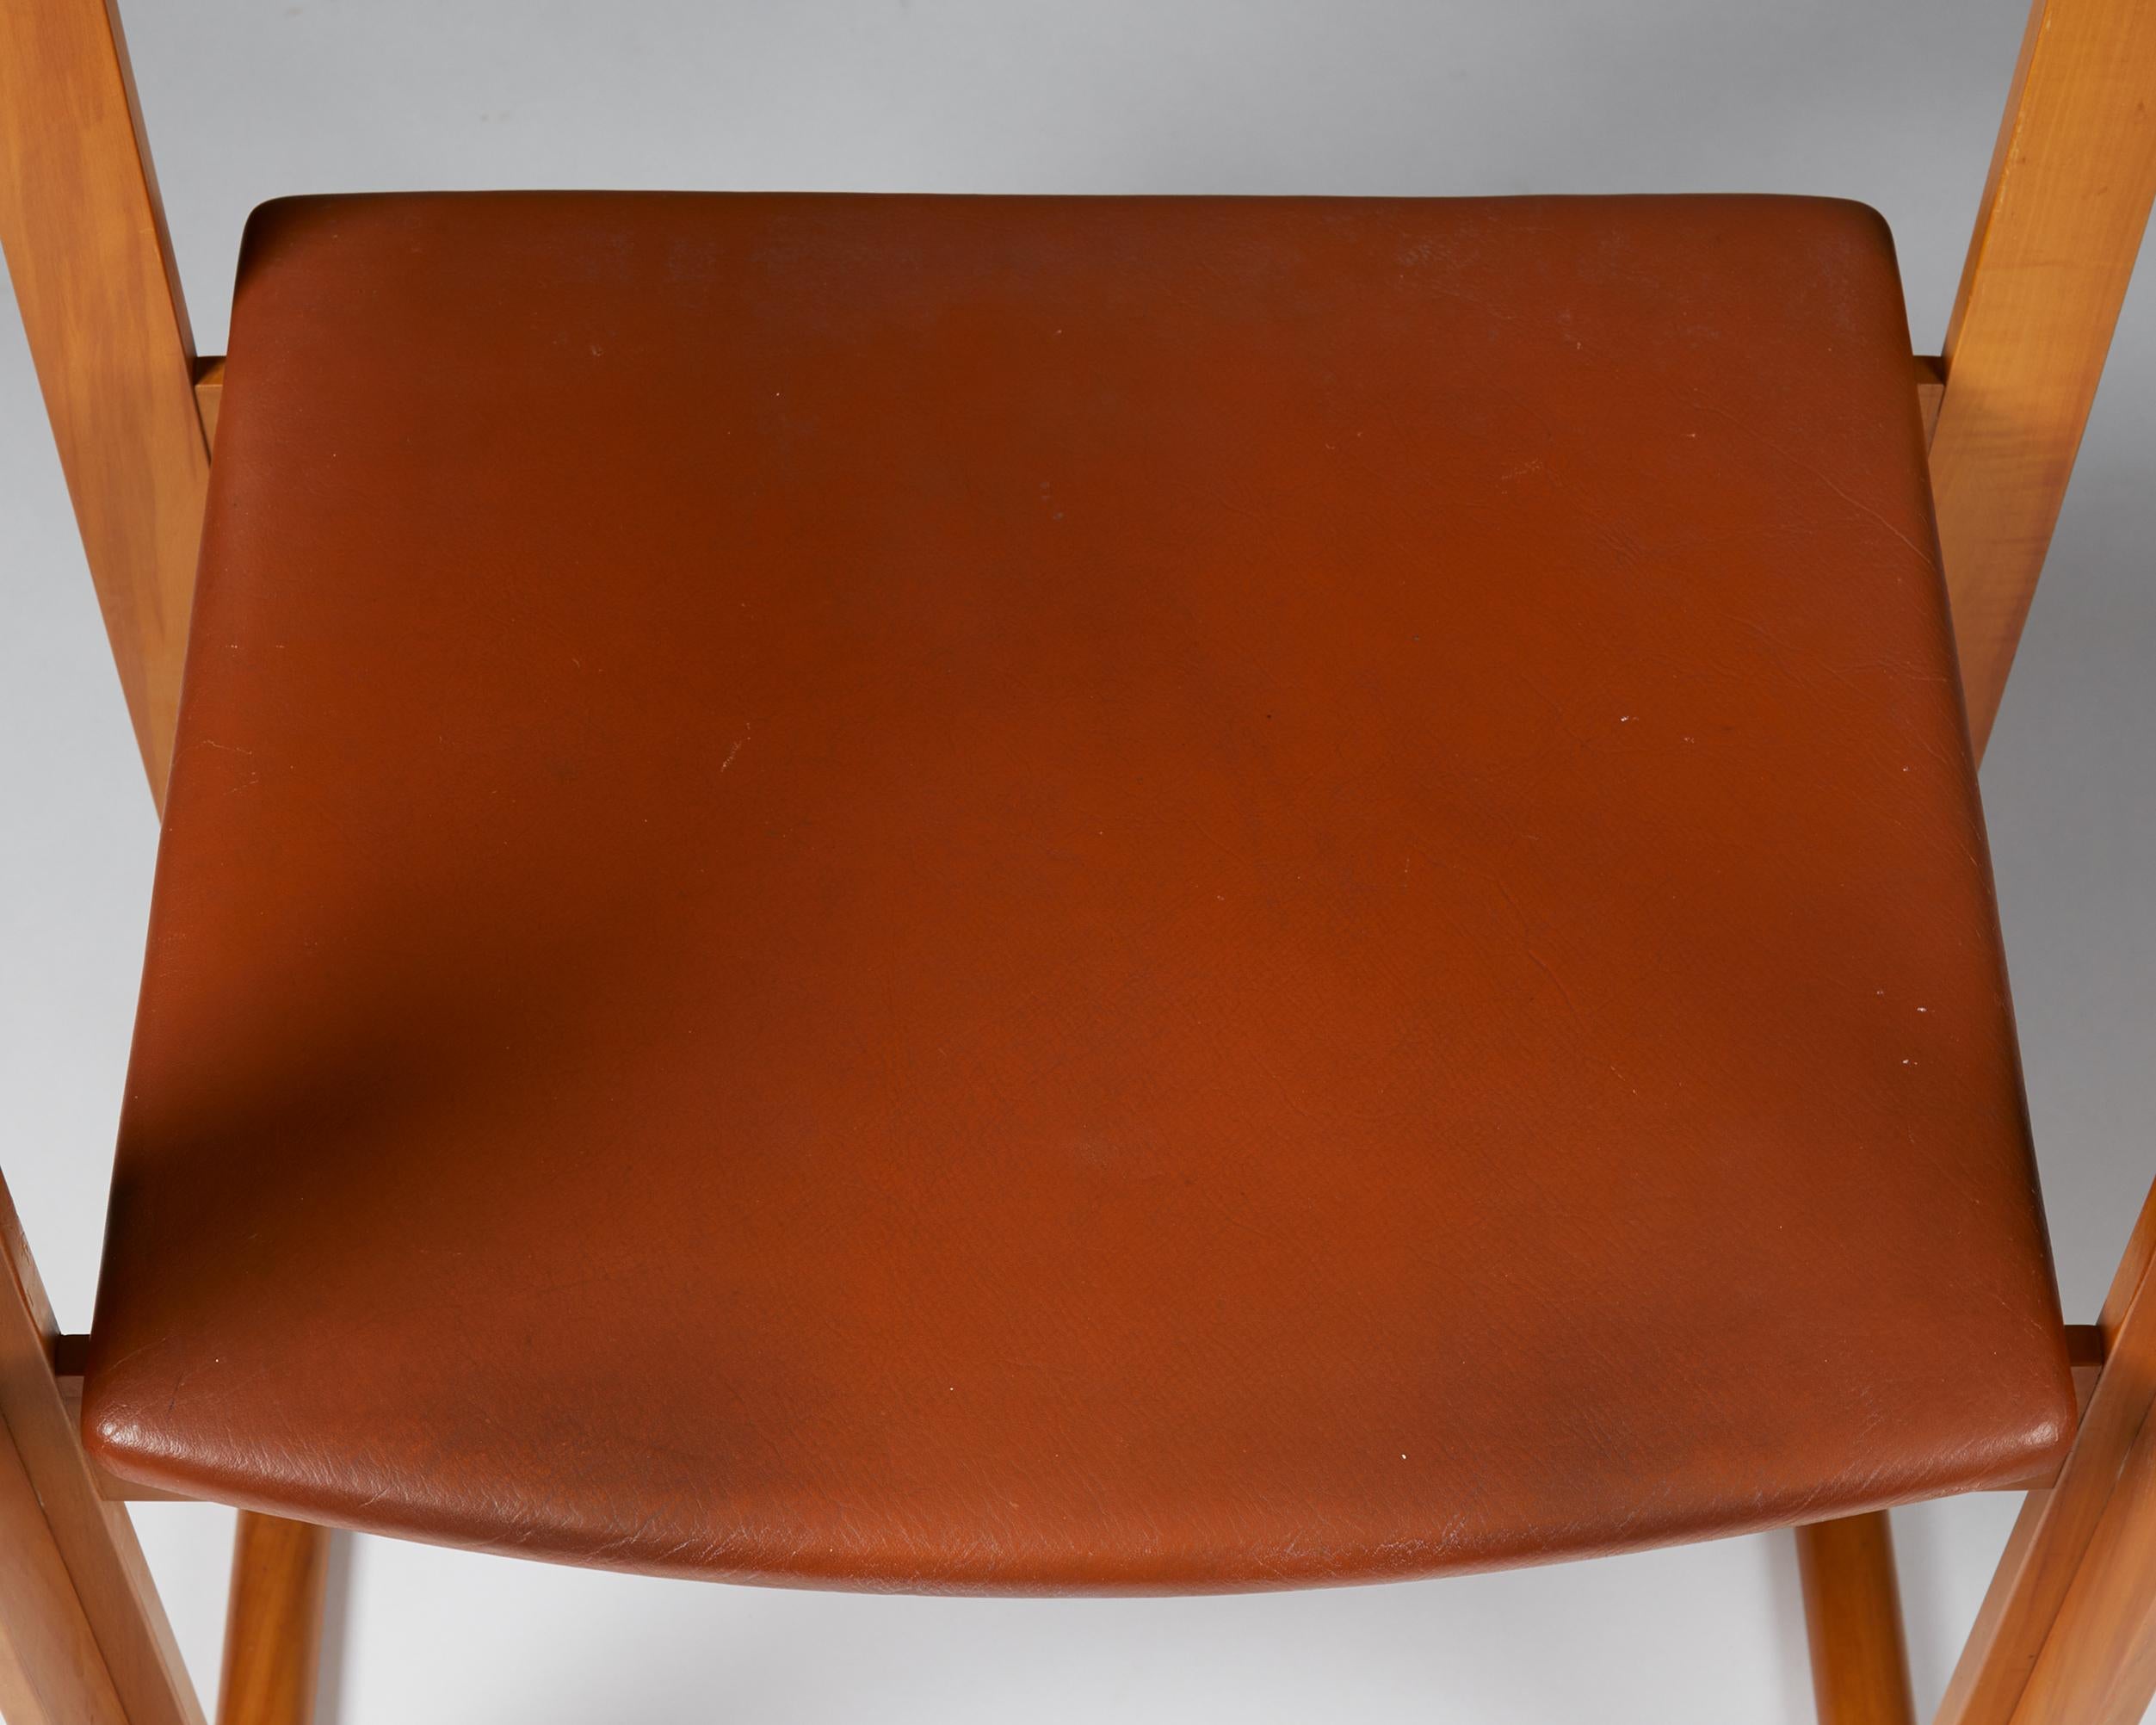 Armchair Designed by Anders Berglund and Gösta Engström for Hans Johansson In Good Condition For Sale In Stockholm, SE